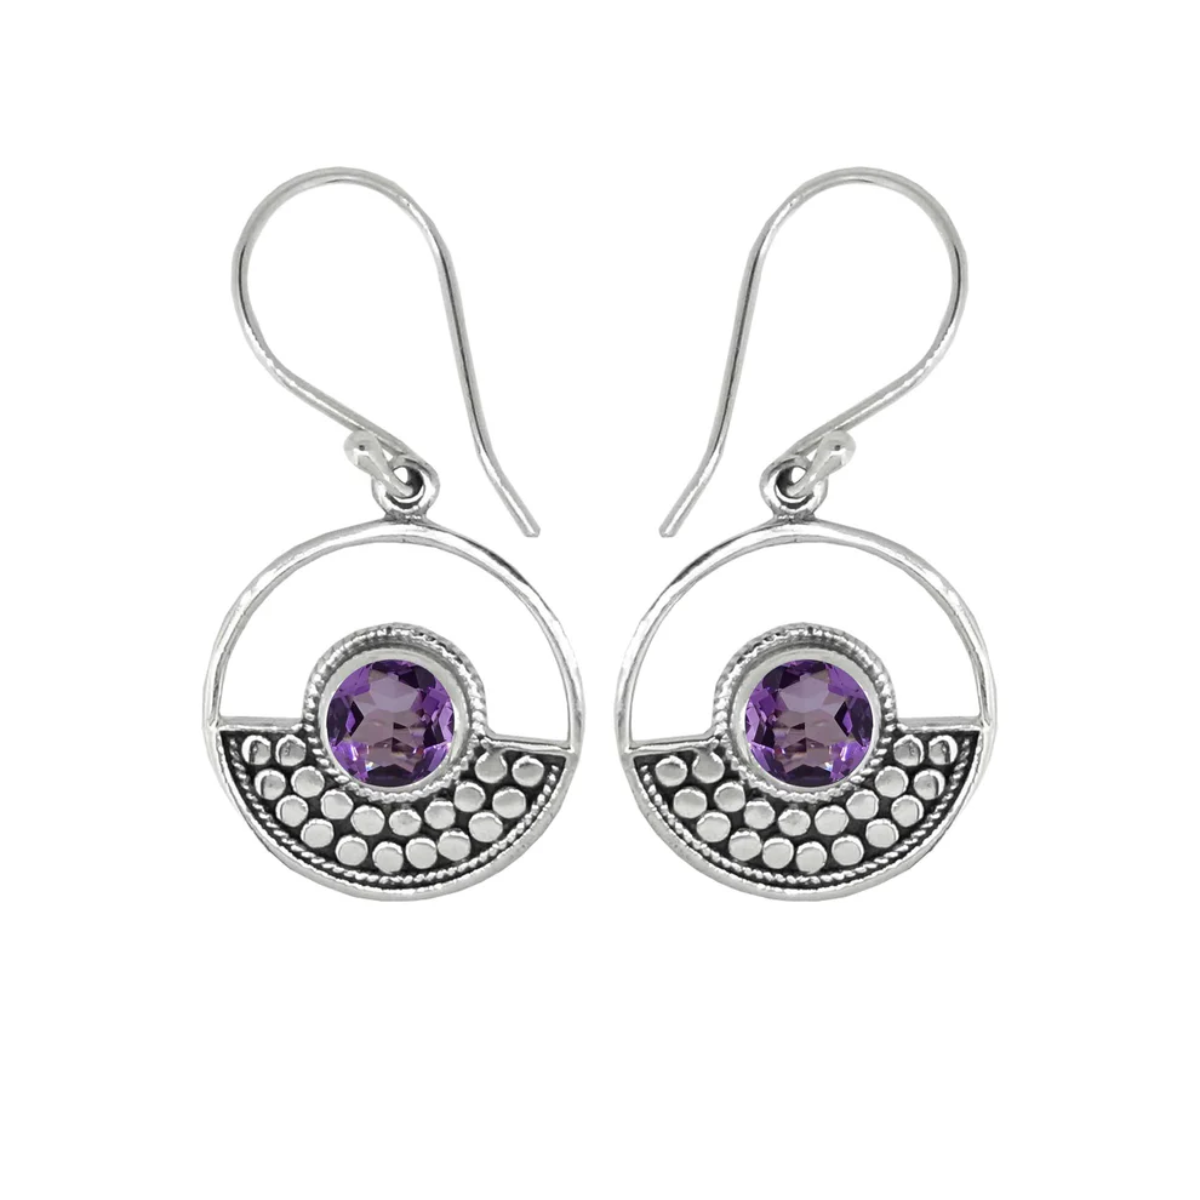 Sterling Silver design in a circle surrounds a circular amethyst stone on ear wires. Half of the circle is dotted with an oxidized sterling design, the other half is open.